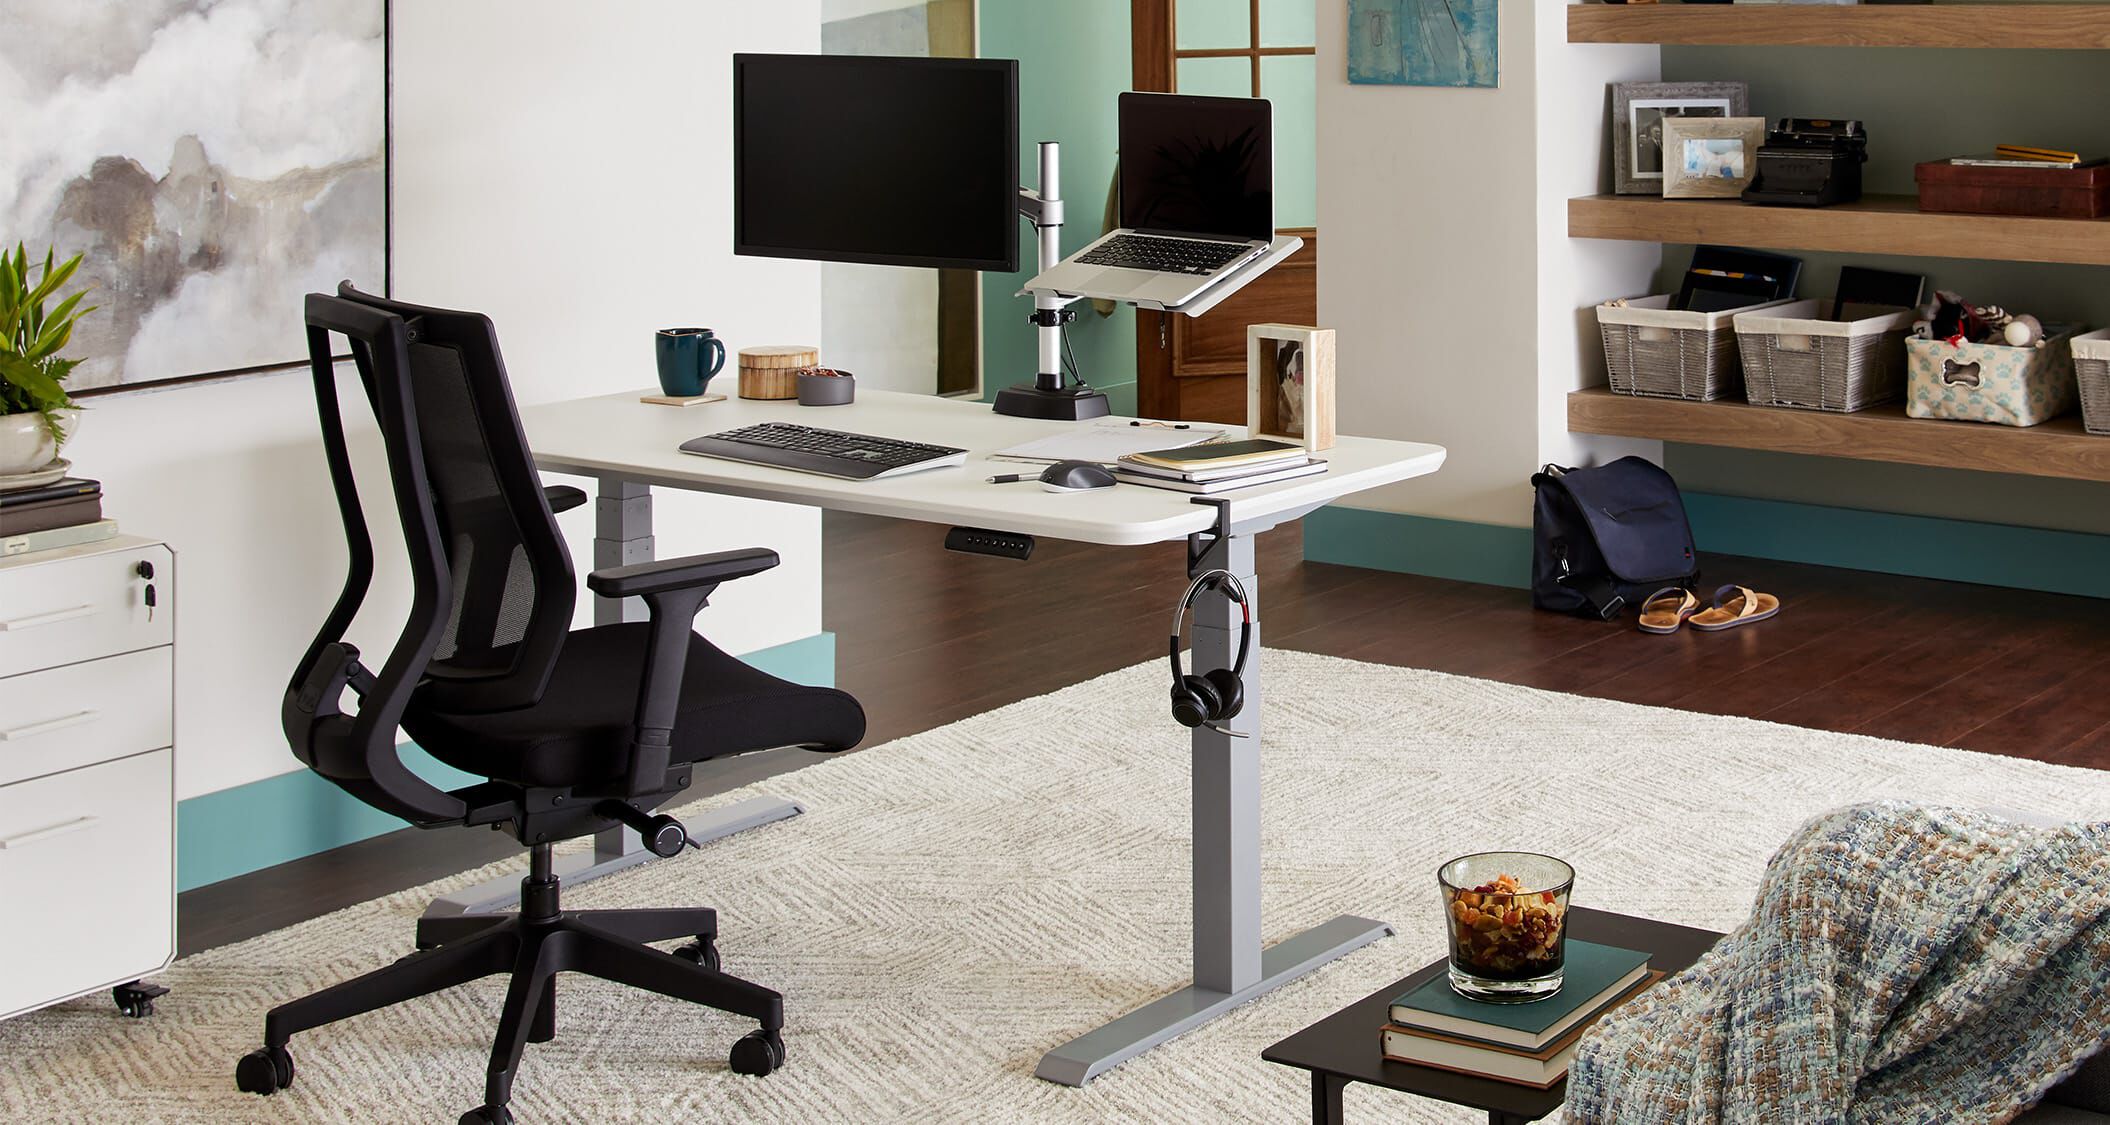 Electric standing desk in living room space to create a home office